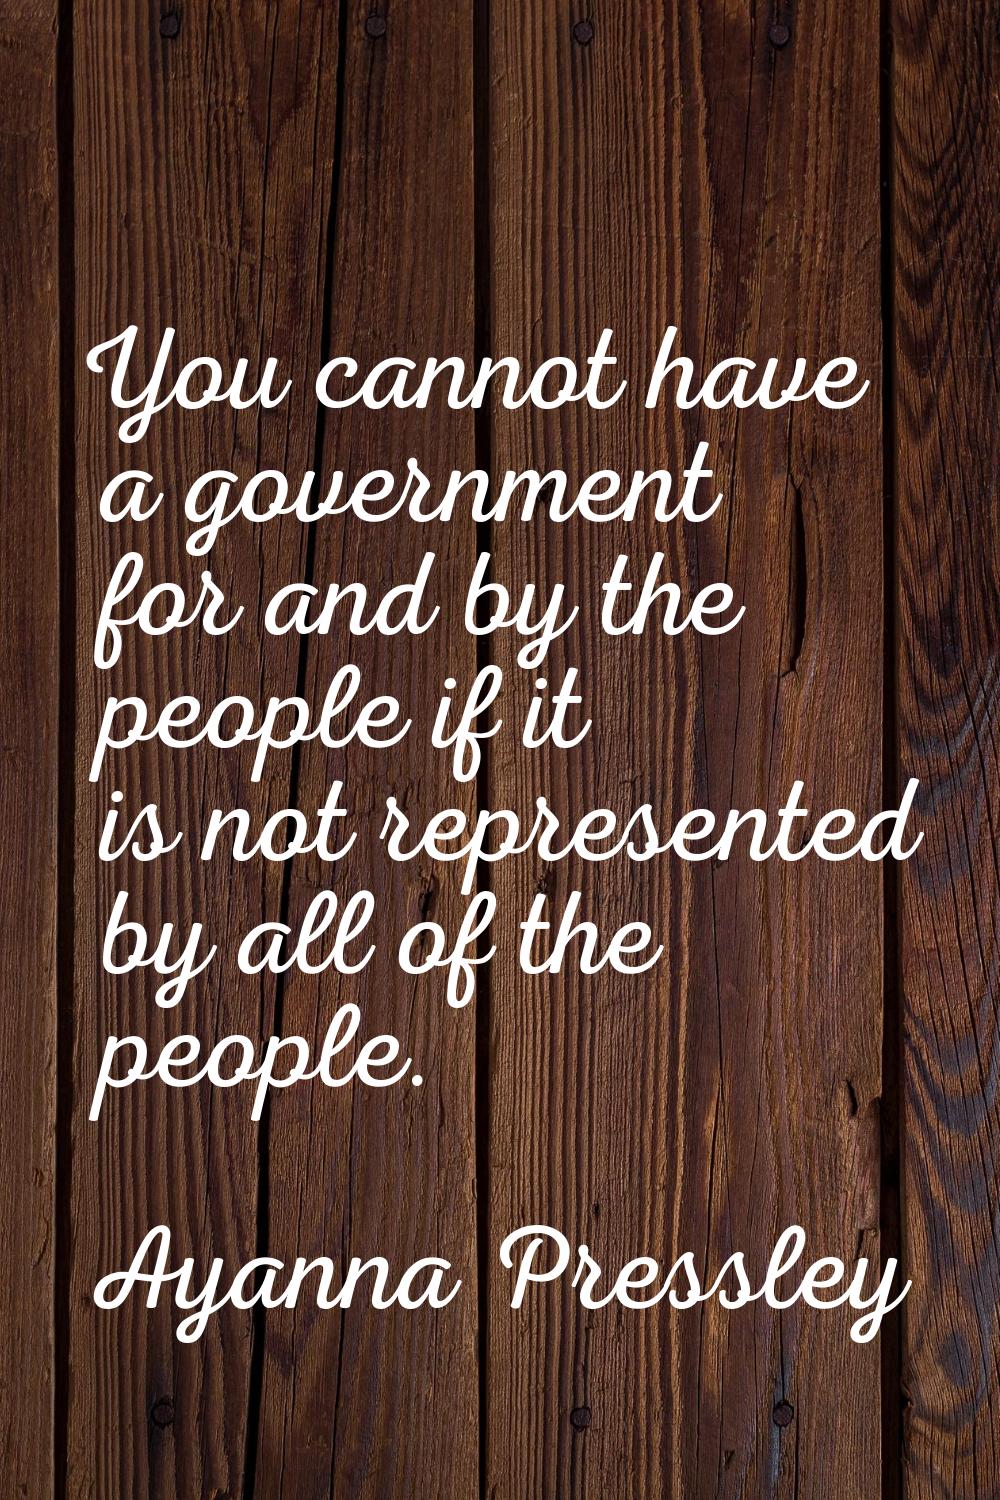 You cannot have a government for and by the people if it is not represented by all of the people.